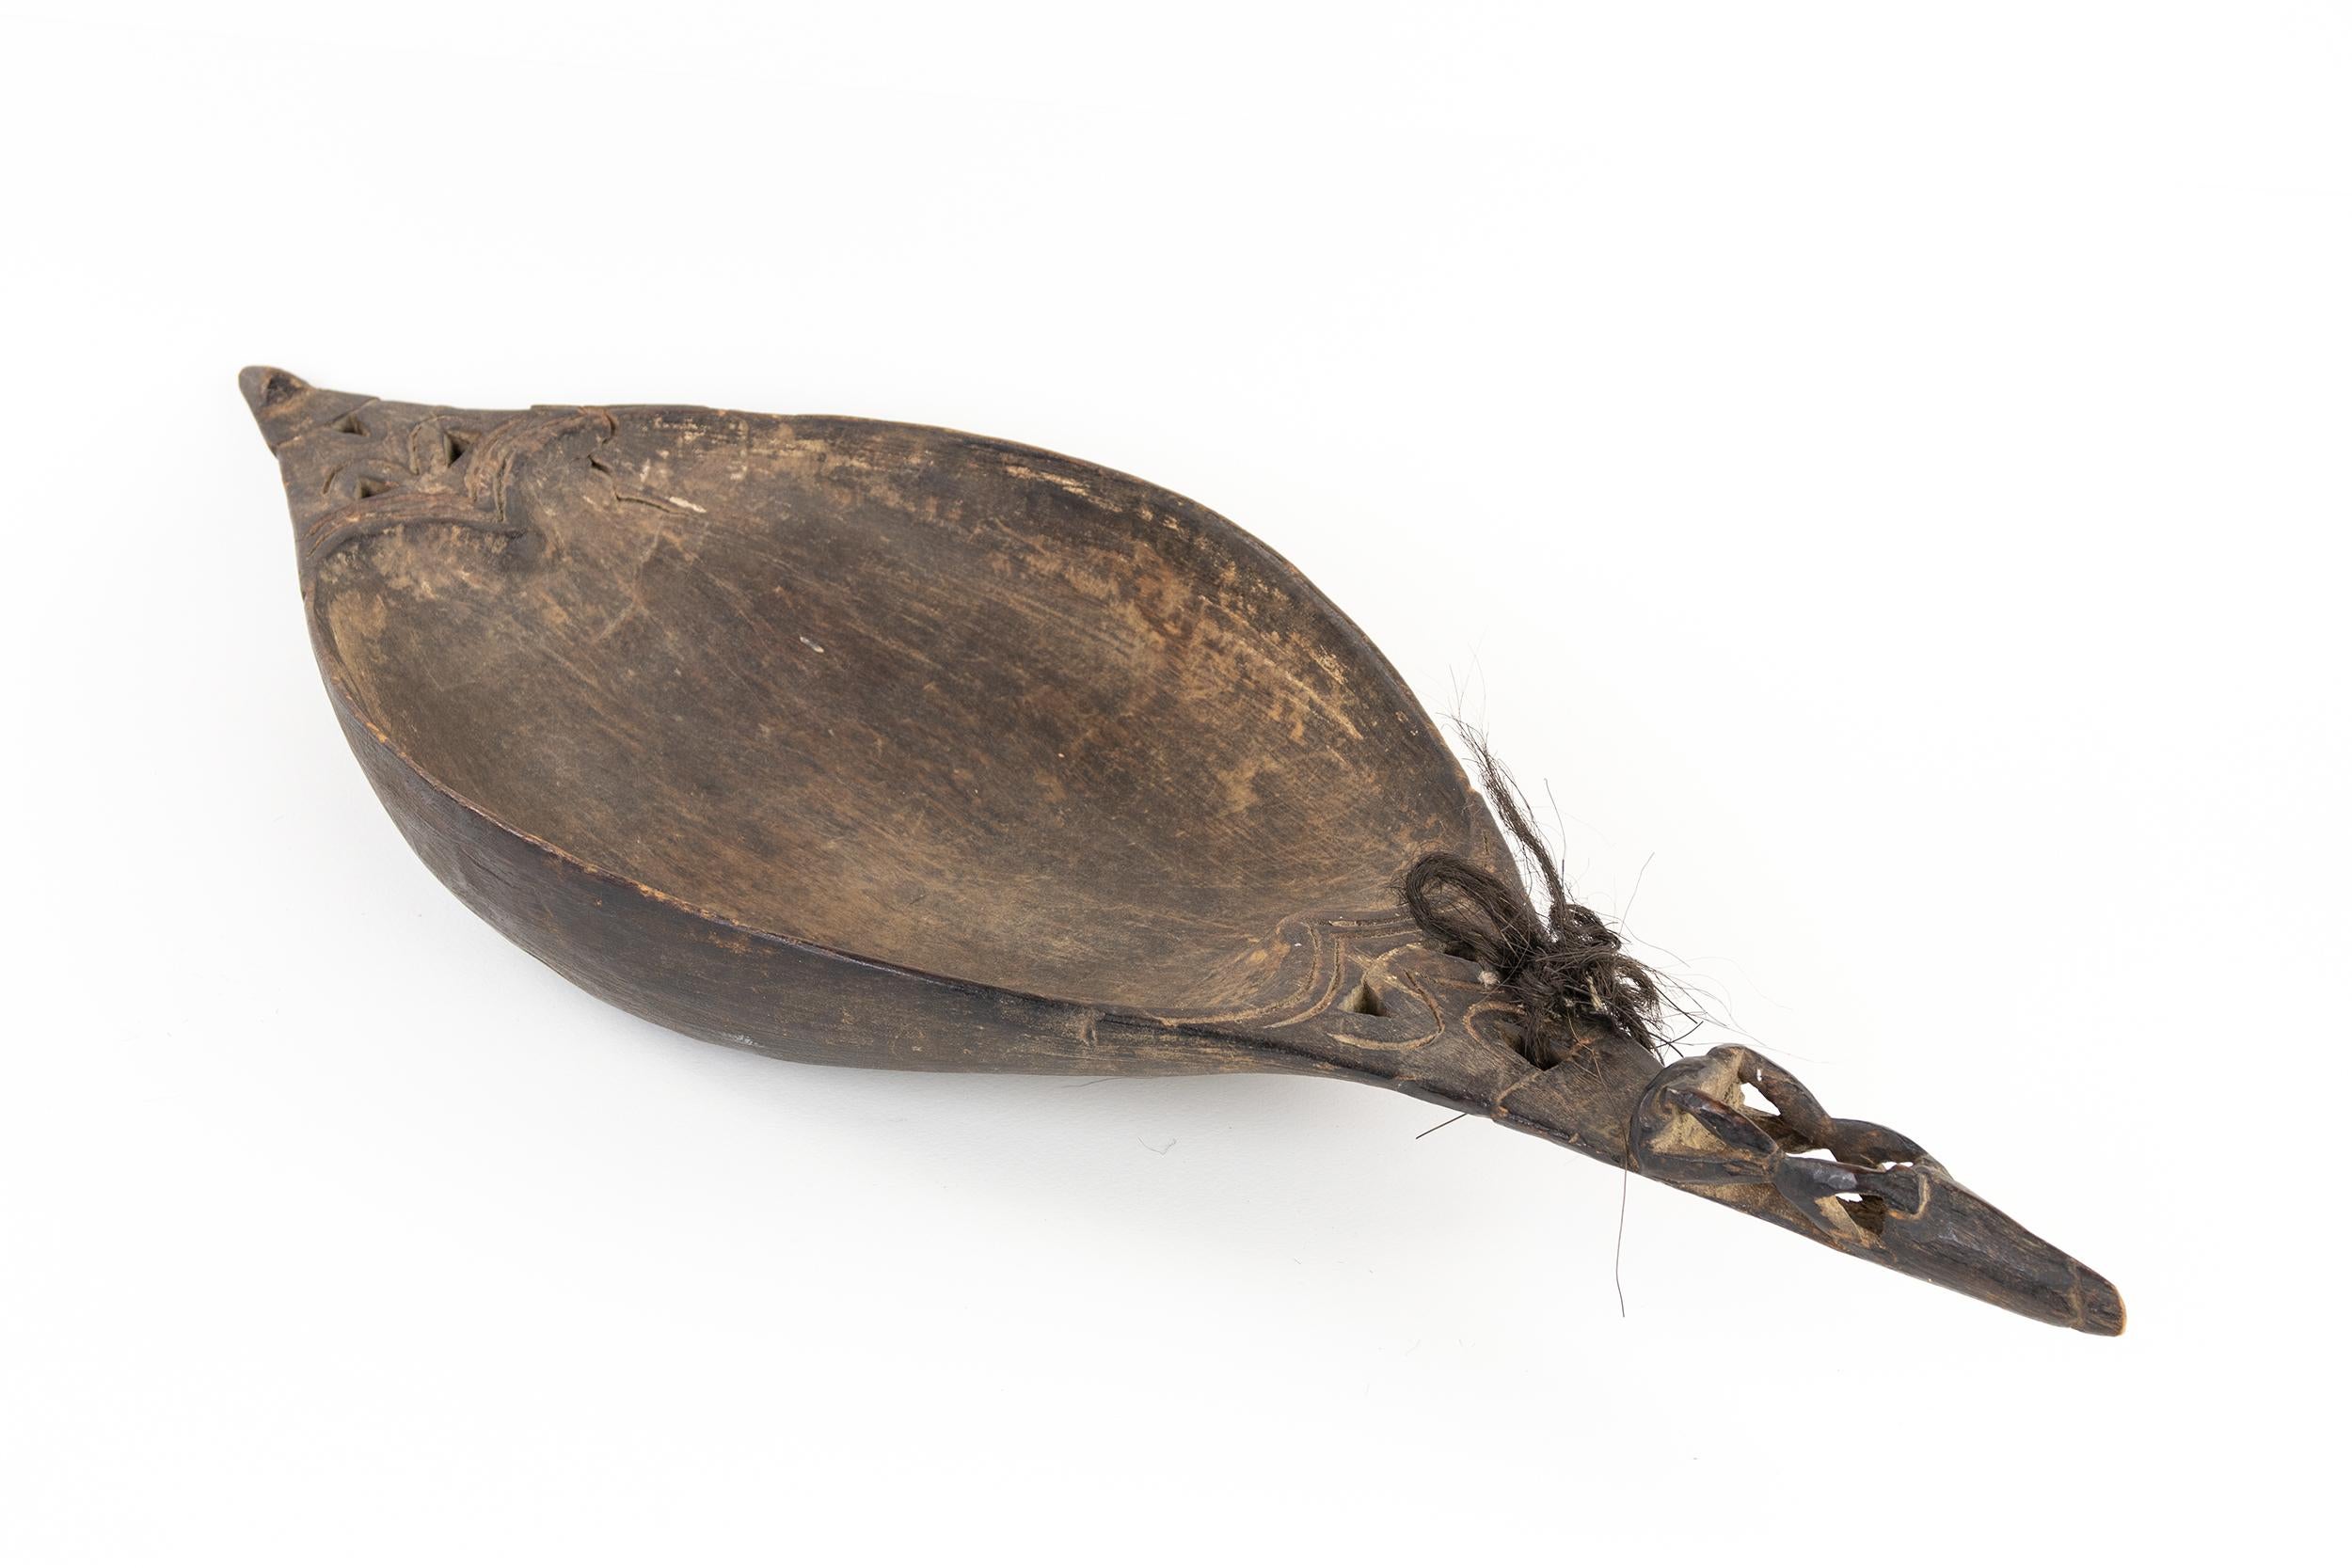 Its elongated oval shape recalls that of a canoe, it has two carved handles shaped like stylized animals.

This artwork is shipped from Italy. Under existing legislation, any artwork in Italy created over 70 years ago by an artist who has died